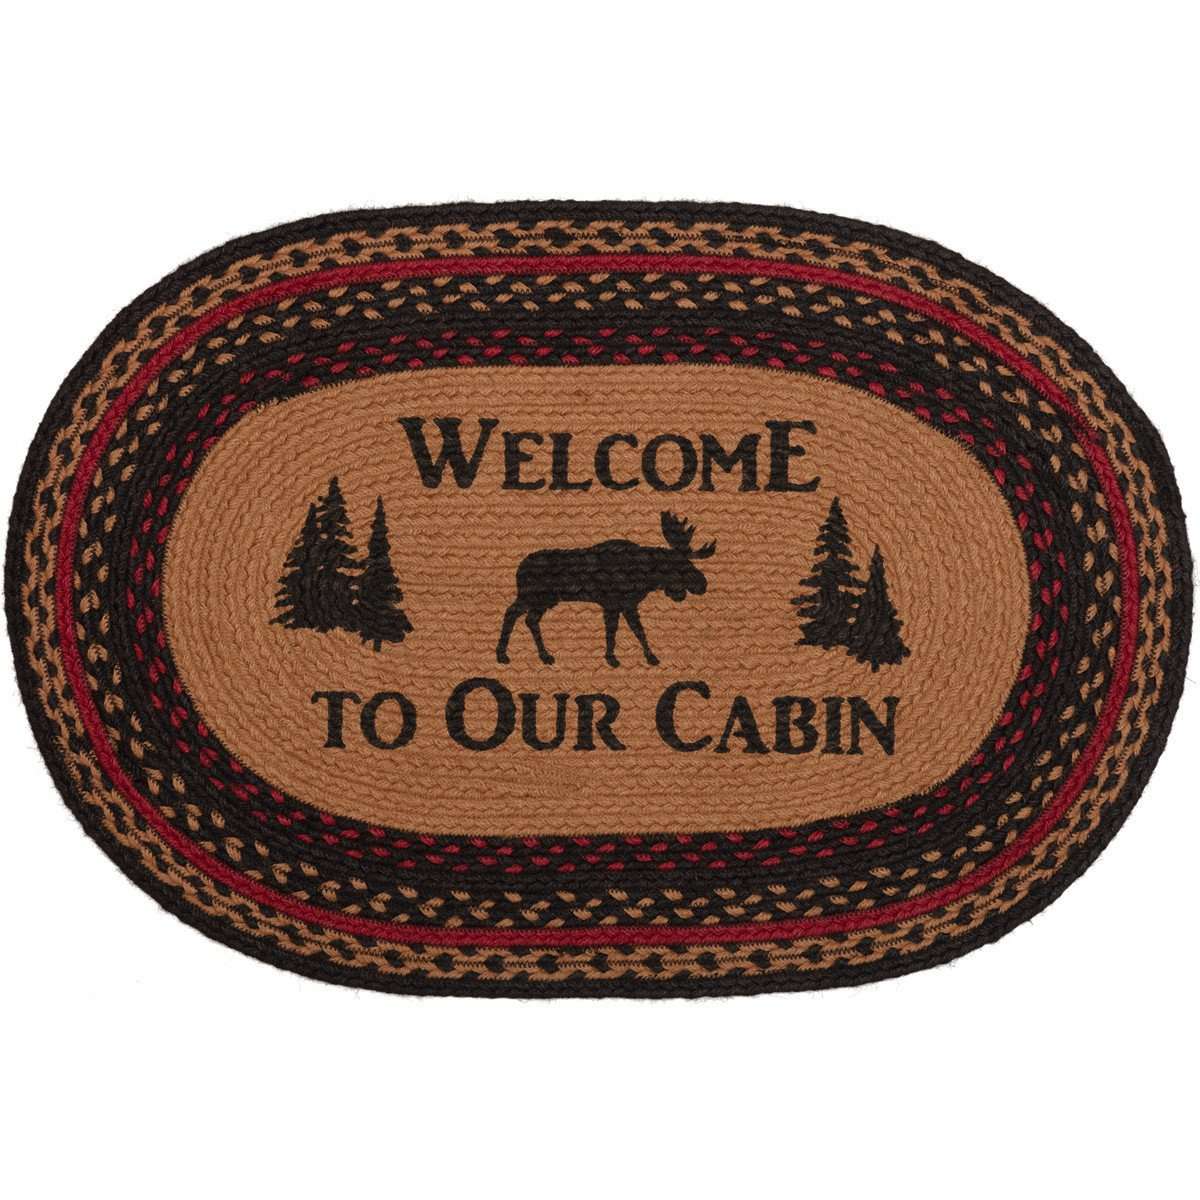 Cumberland Stenciled Moose Jute Braided Rug Oval/Rect Welcome to the Cabin VHC Brands rugs VHC Brands 20x30 inch Oval 